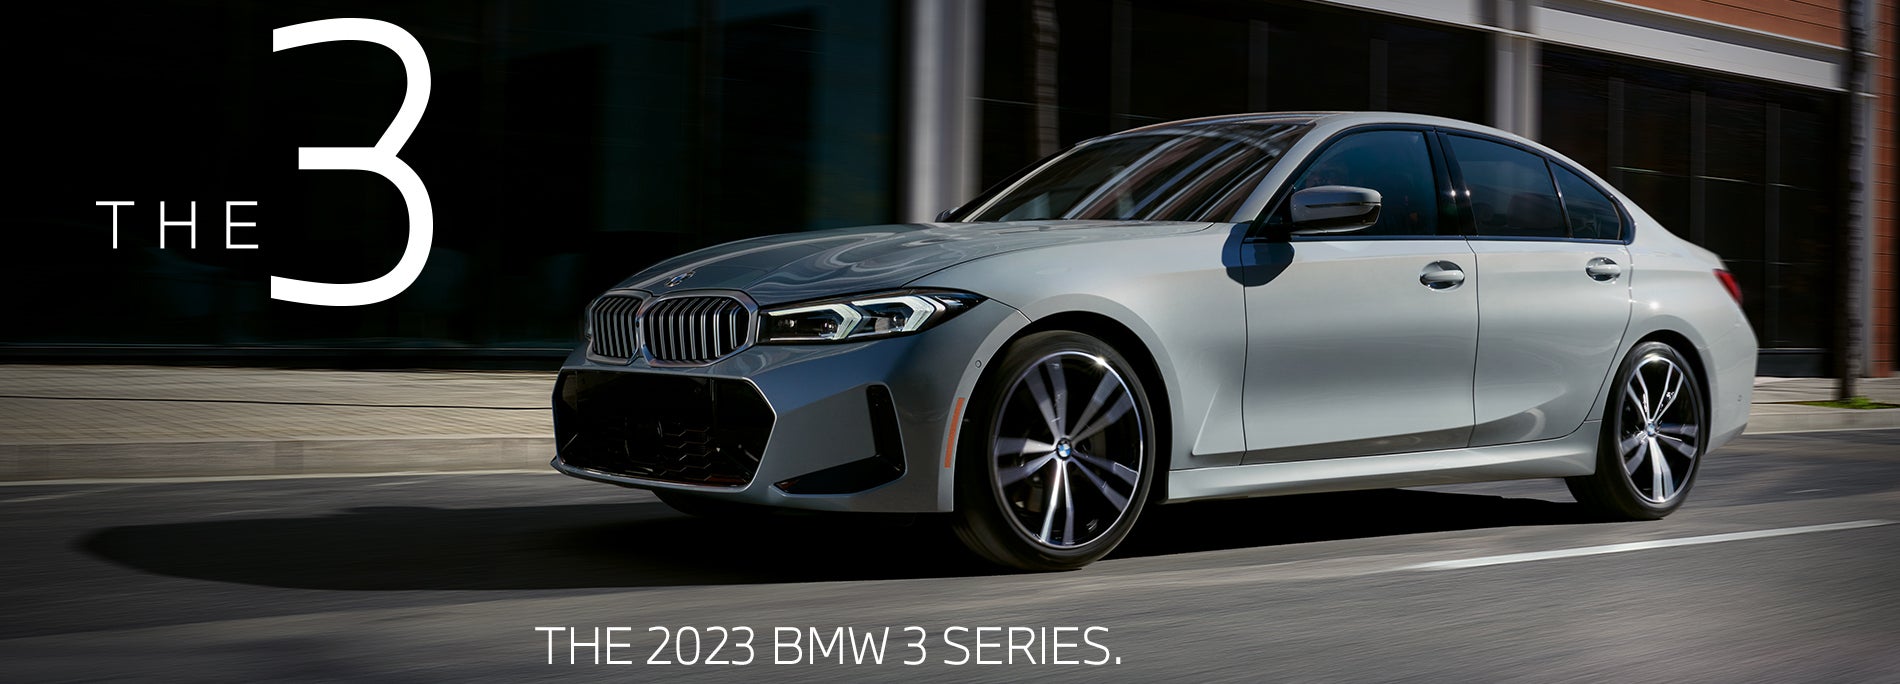 The New 2023 BMW 3 series Lease Special Morristown NJ